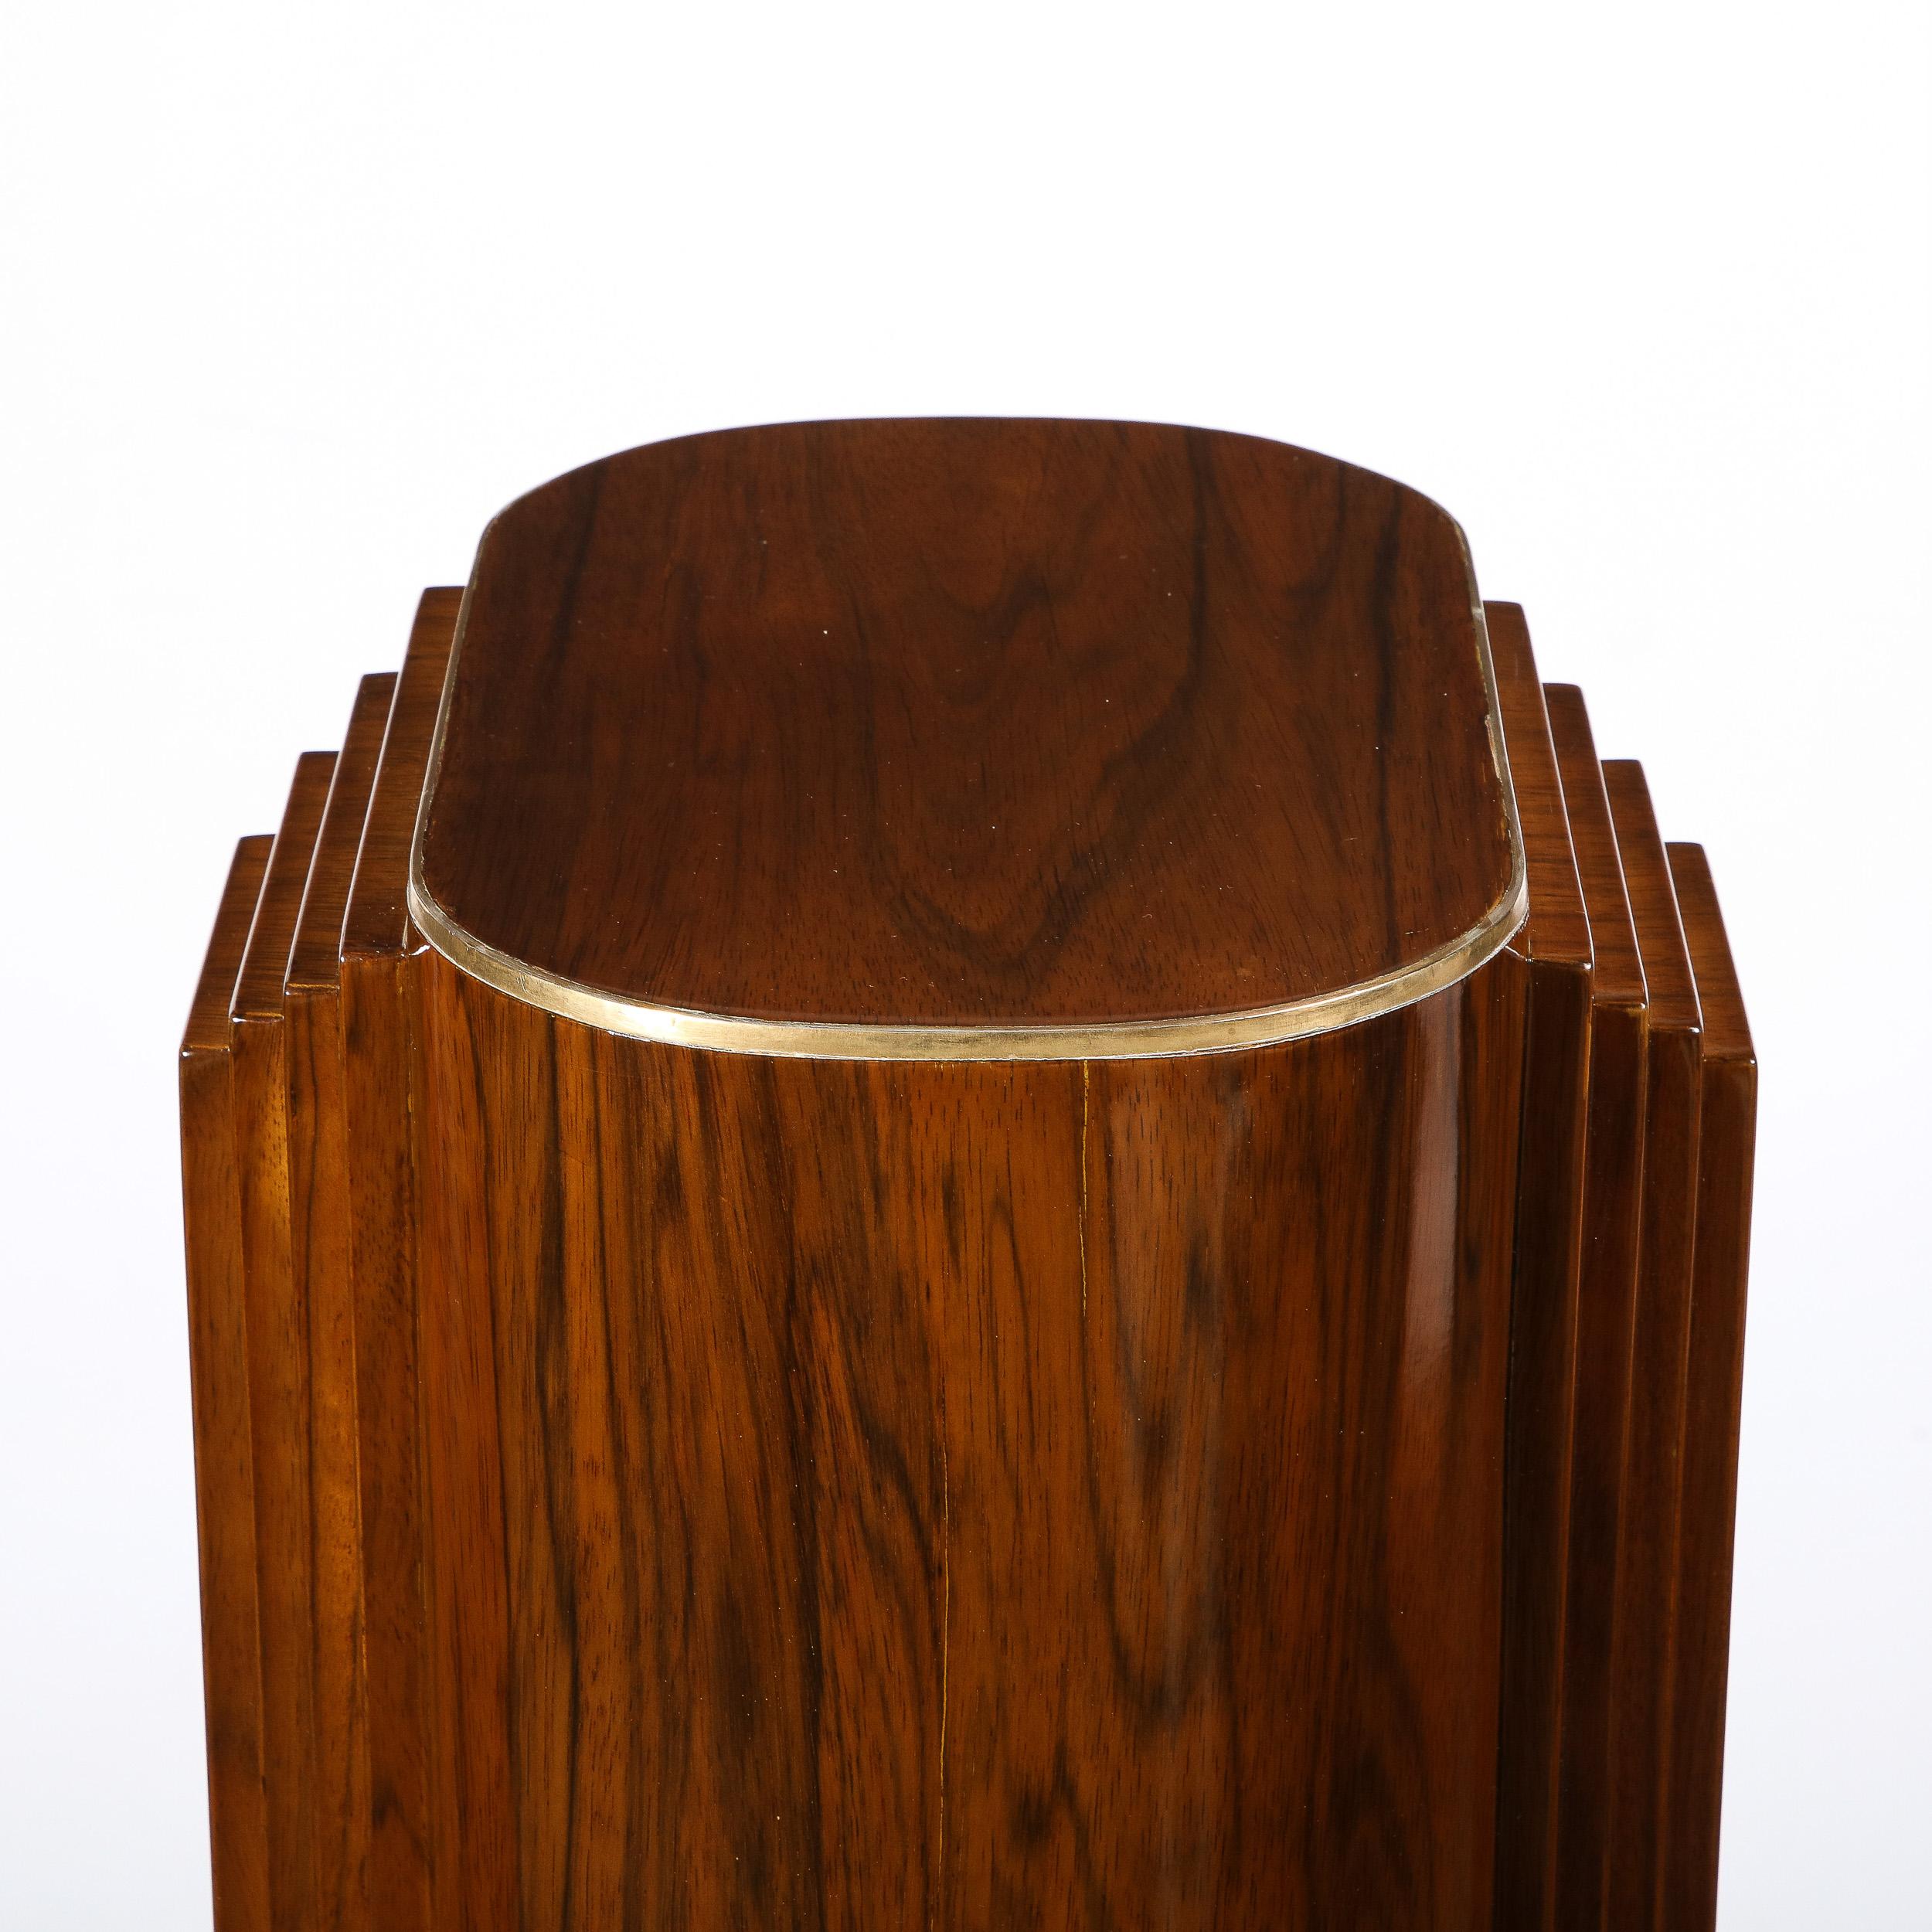 Art Deco Skyscraper Hand-rubbed Book-matched Walnut Pedestal w/ Brass Inlays For Sale 6